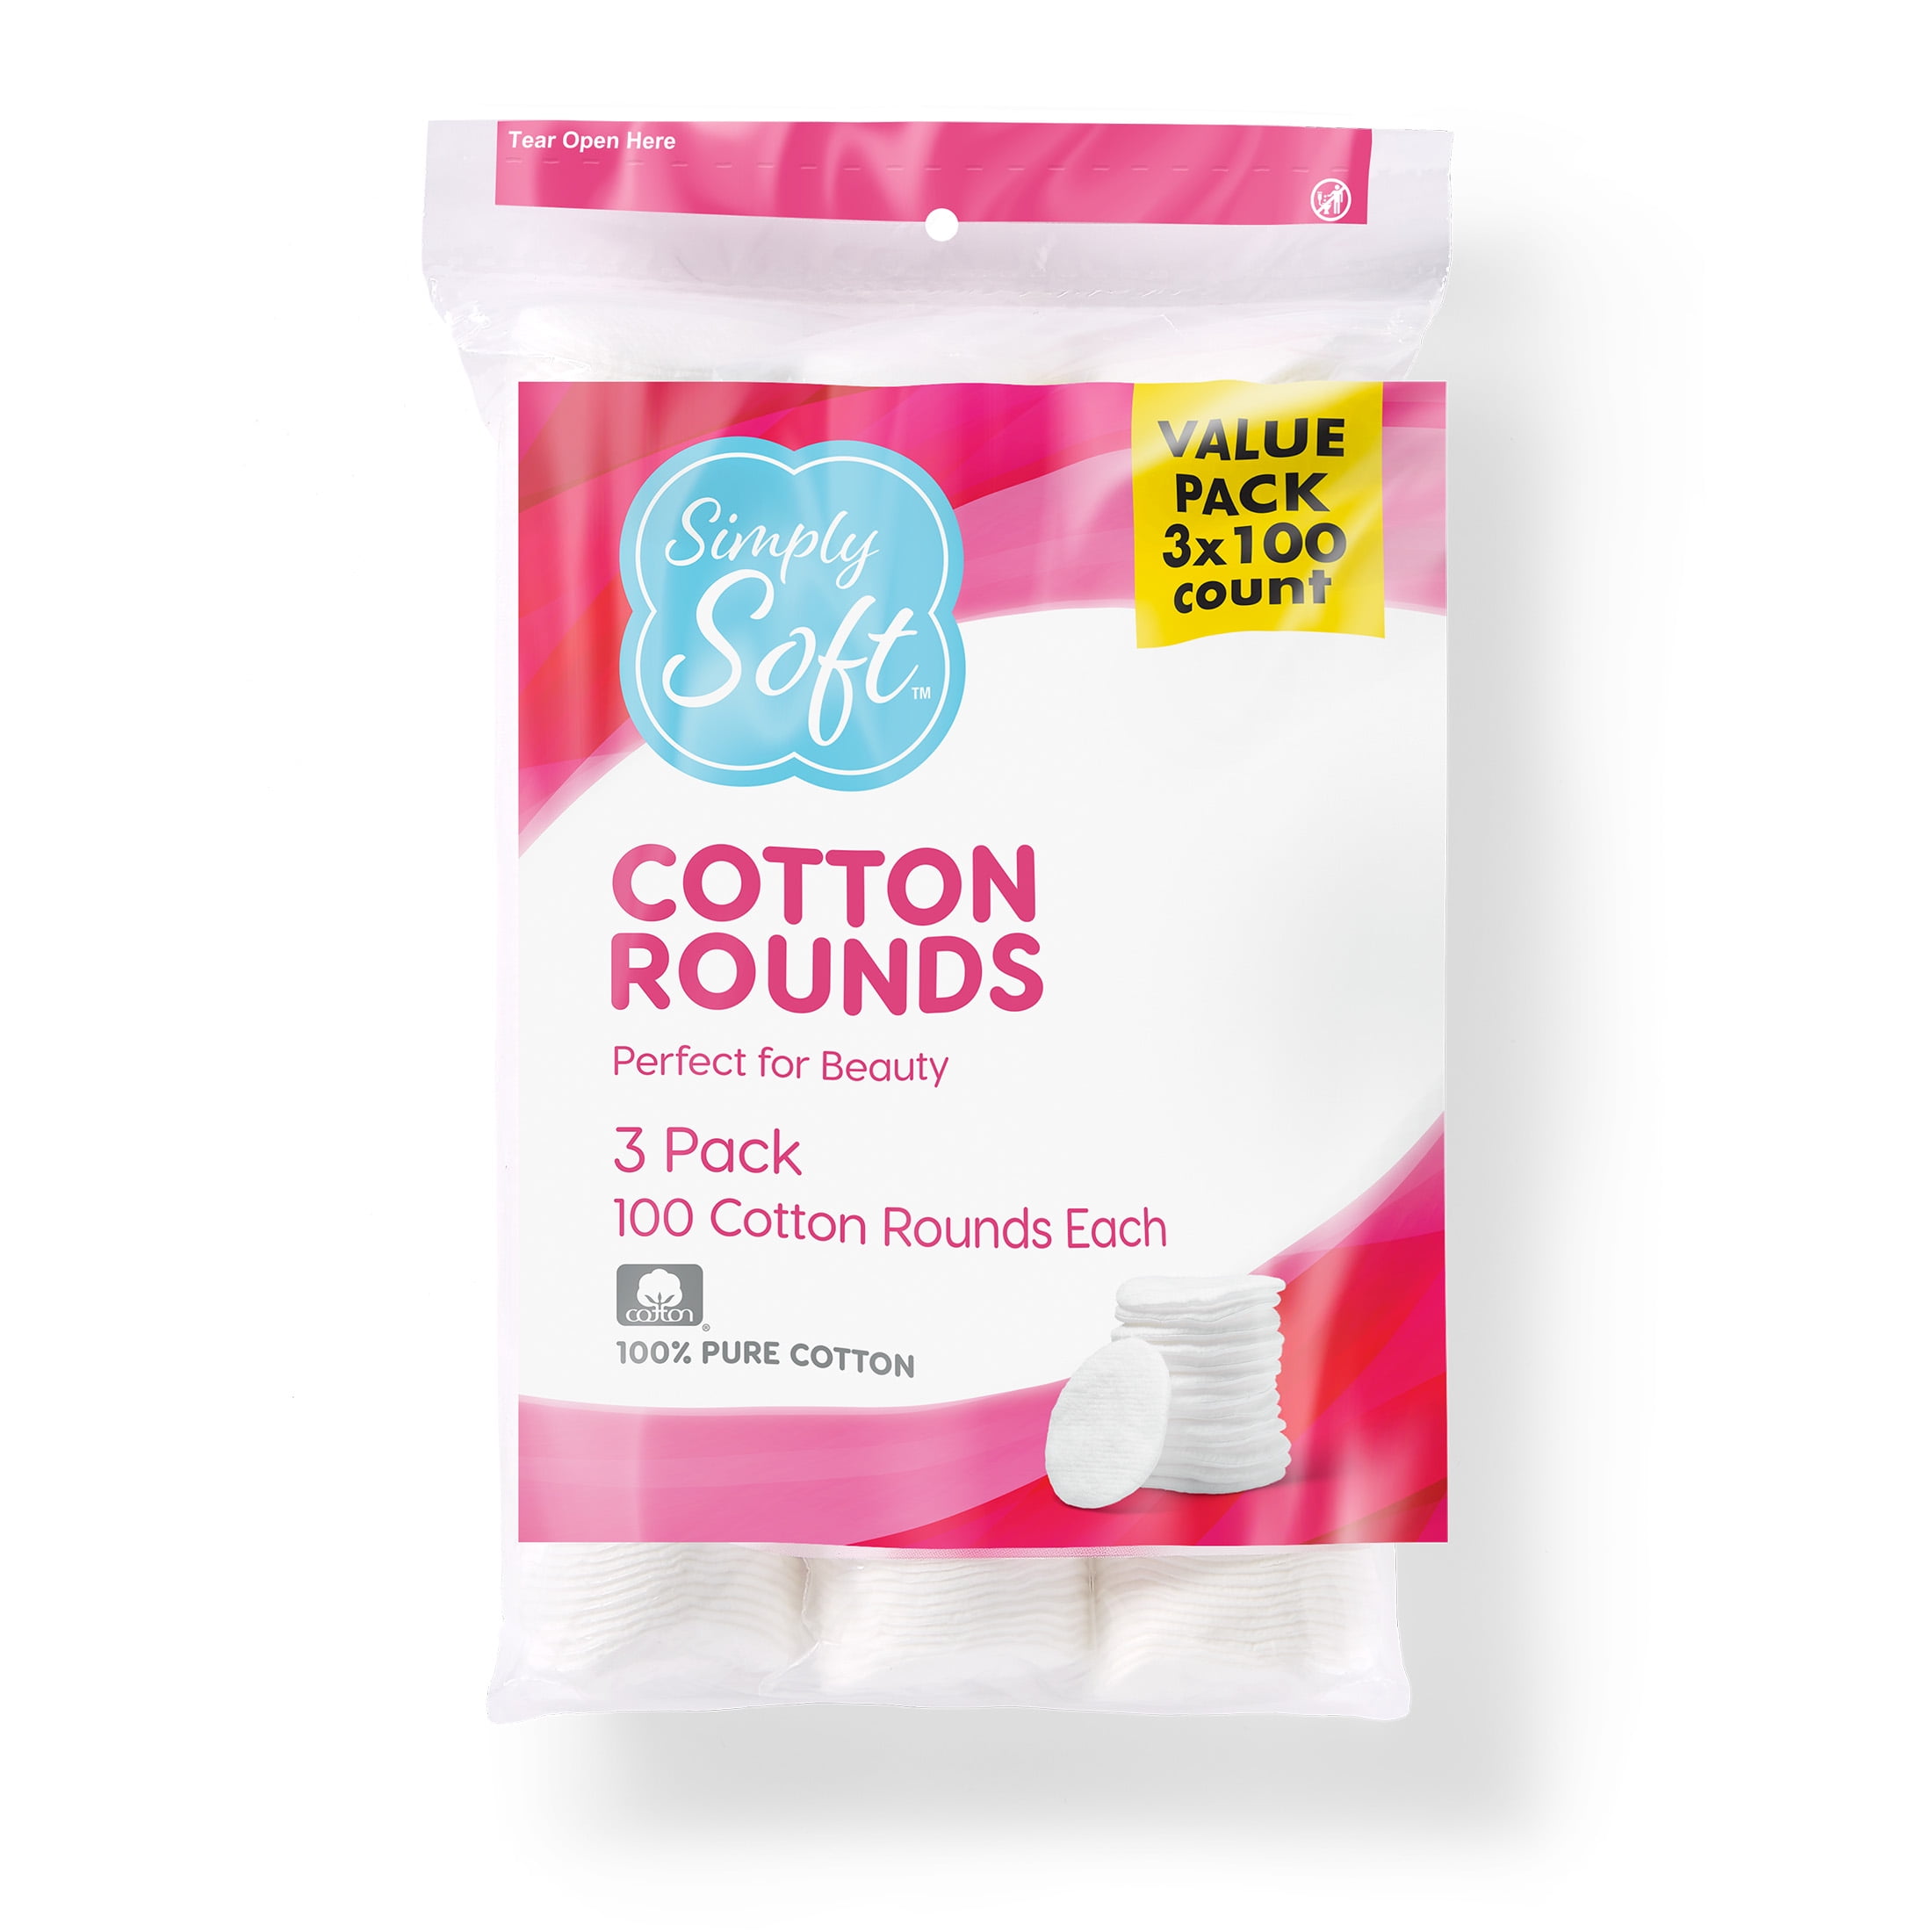 Simply Soft Cotton Rounds, 100% Natural, Lint- Free Cotton Pads, 300 Count